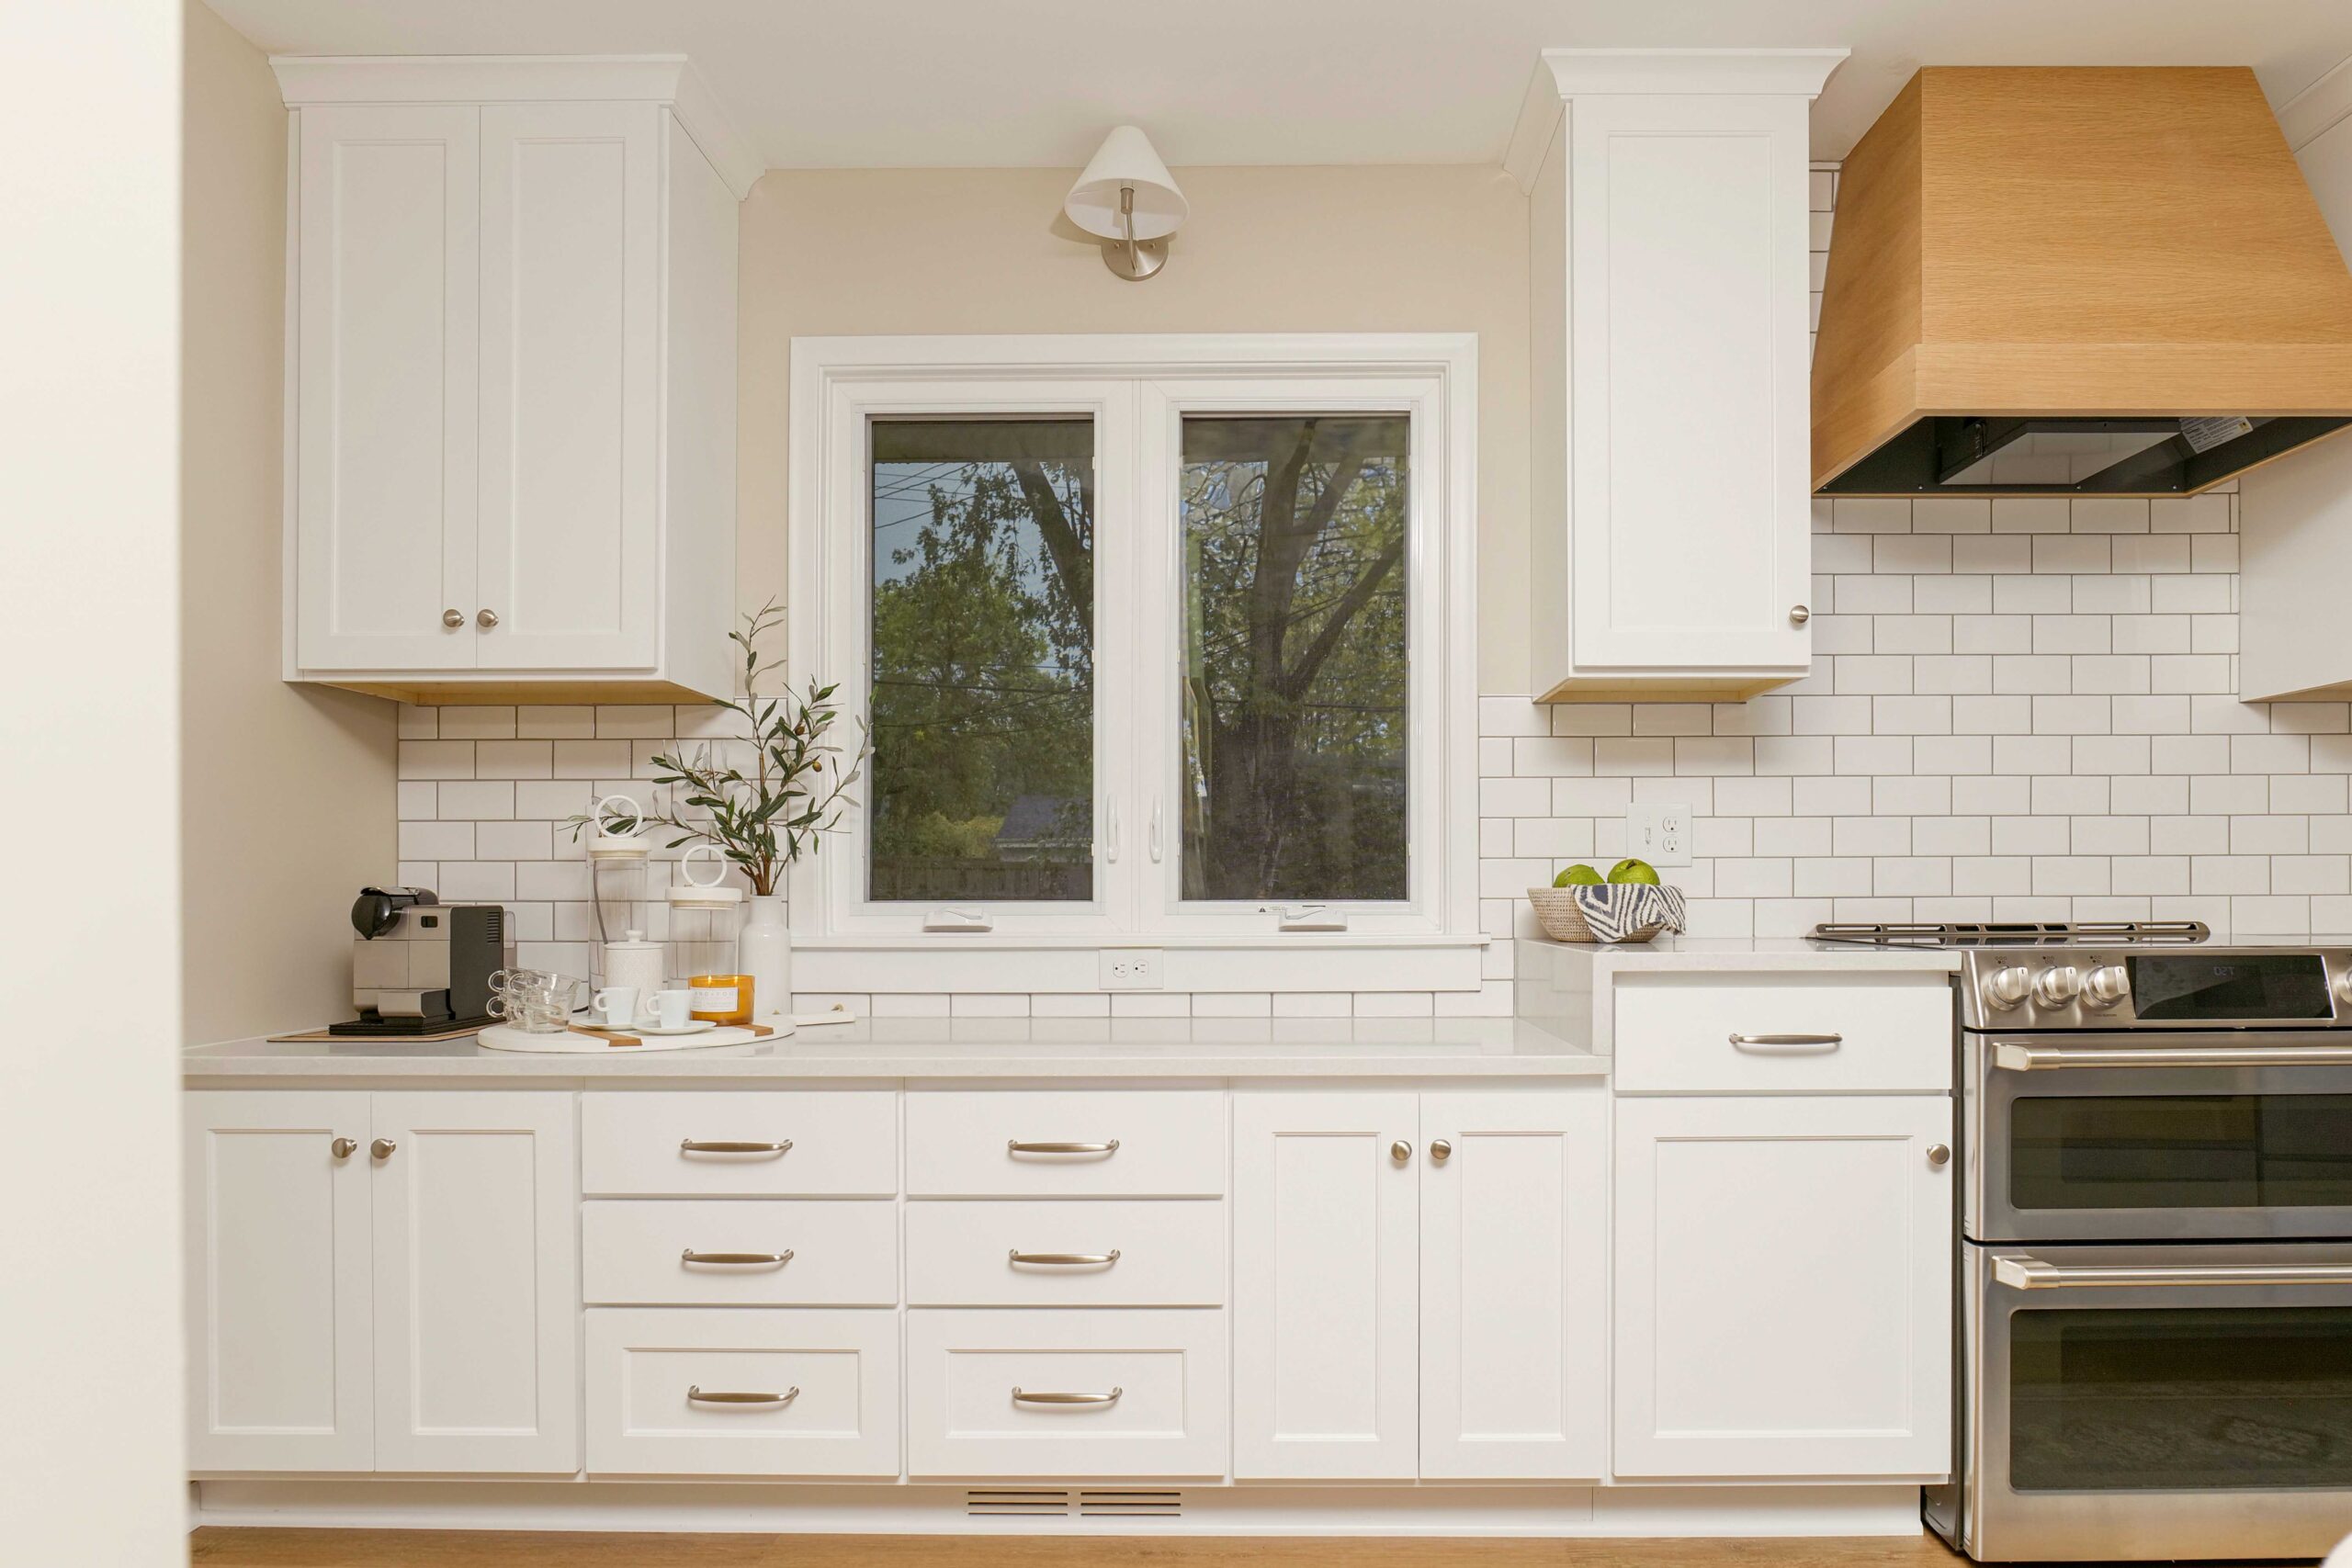 A coastal style kitchen remodel with a white stove and oven.